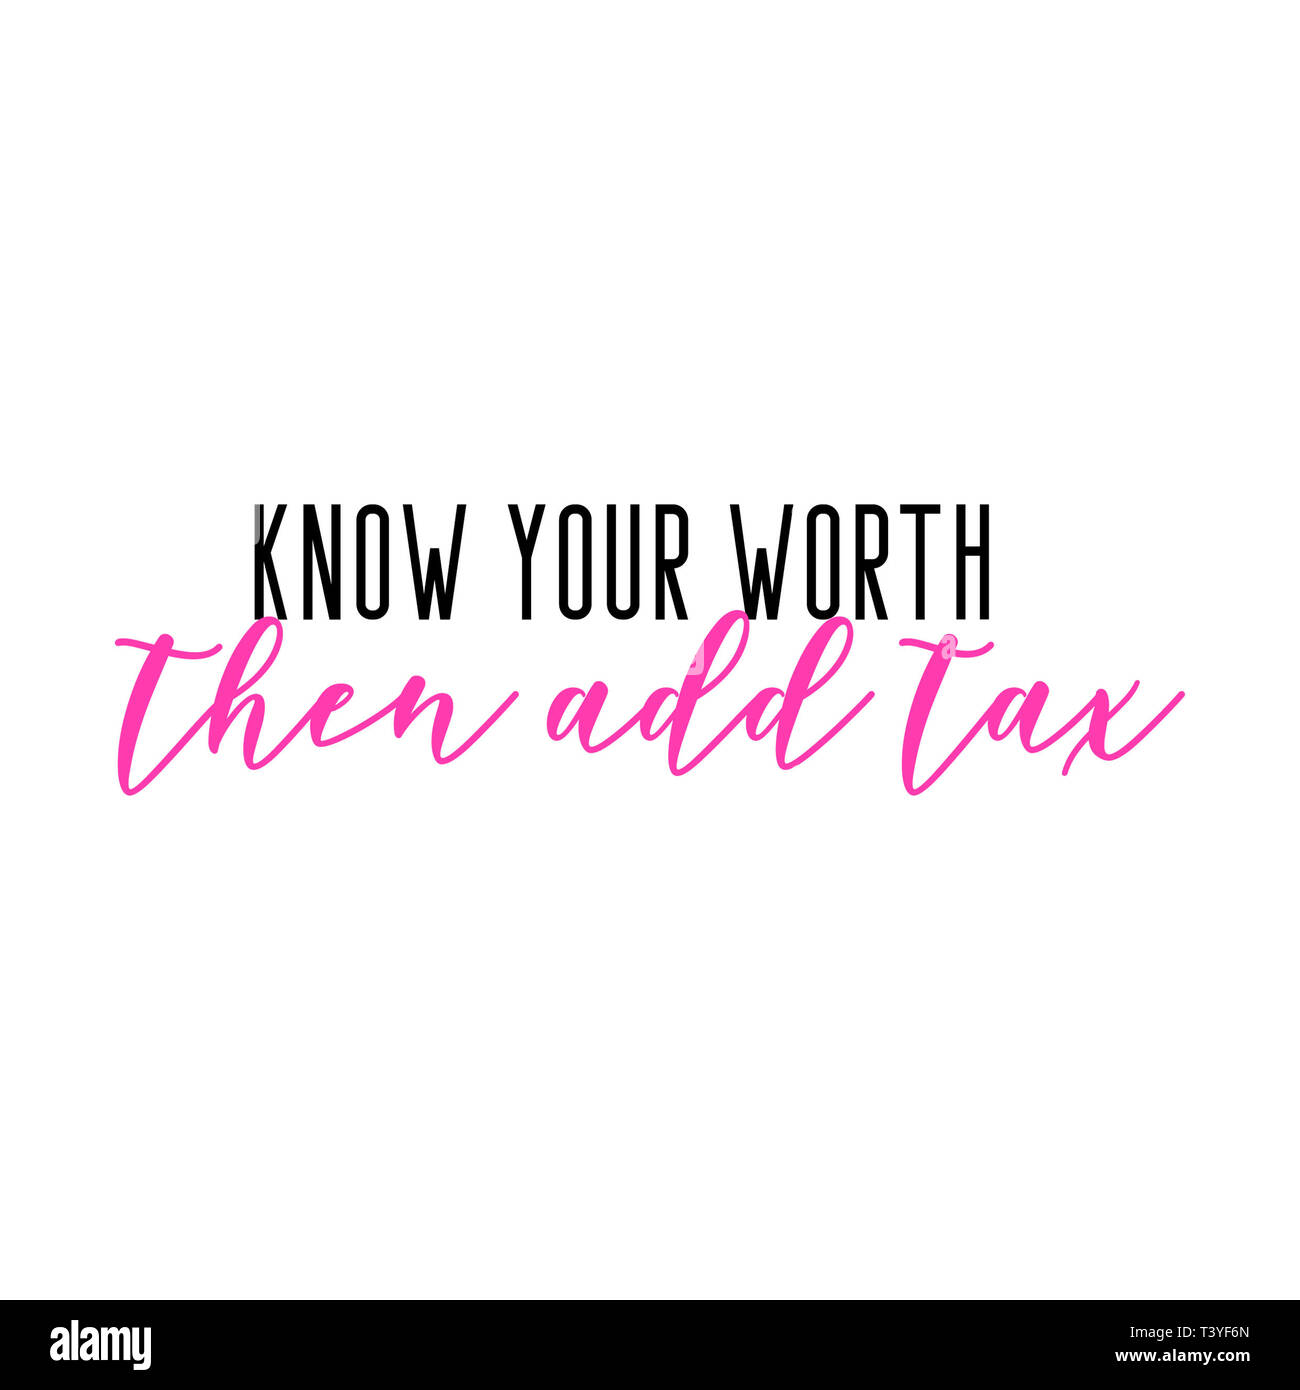 Know your worth then add tax. Girly quote lettering. Stock Photo